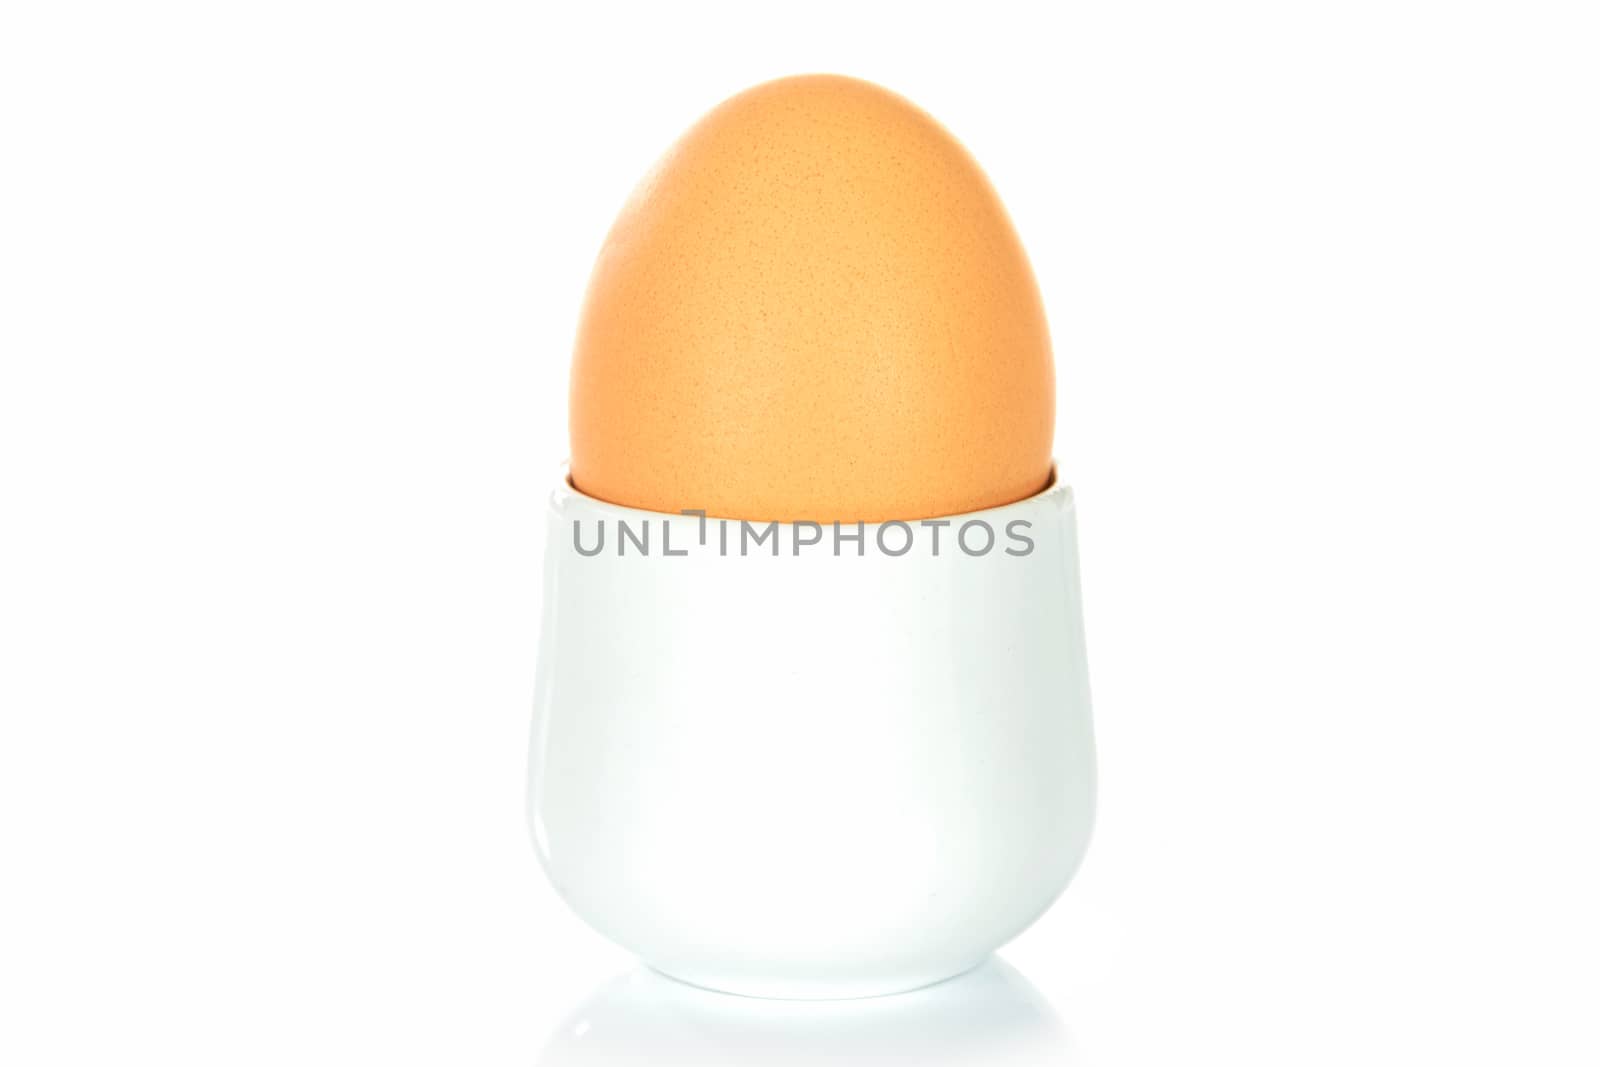  Egg in eggcup by wdnet_studio